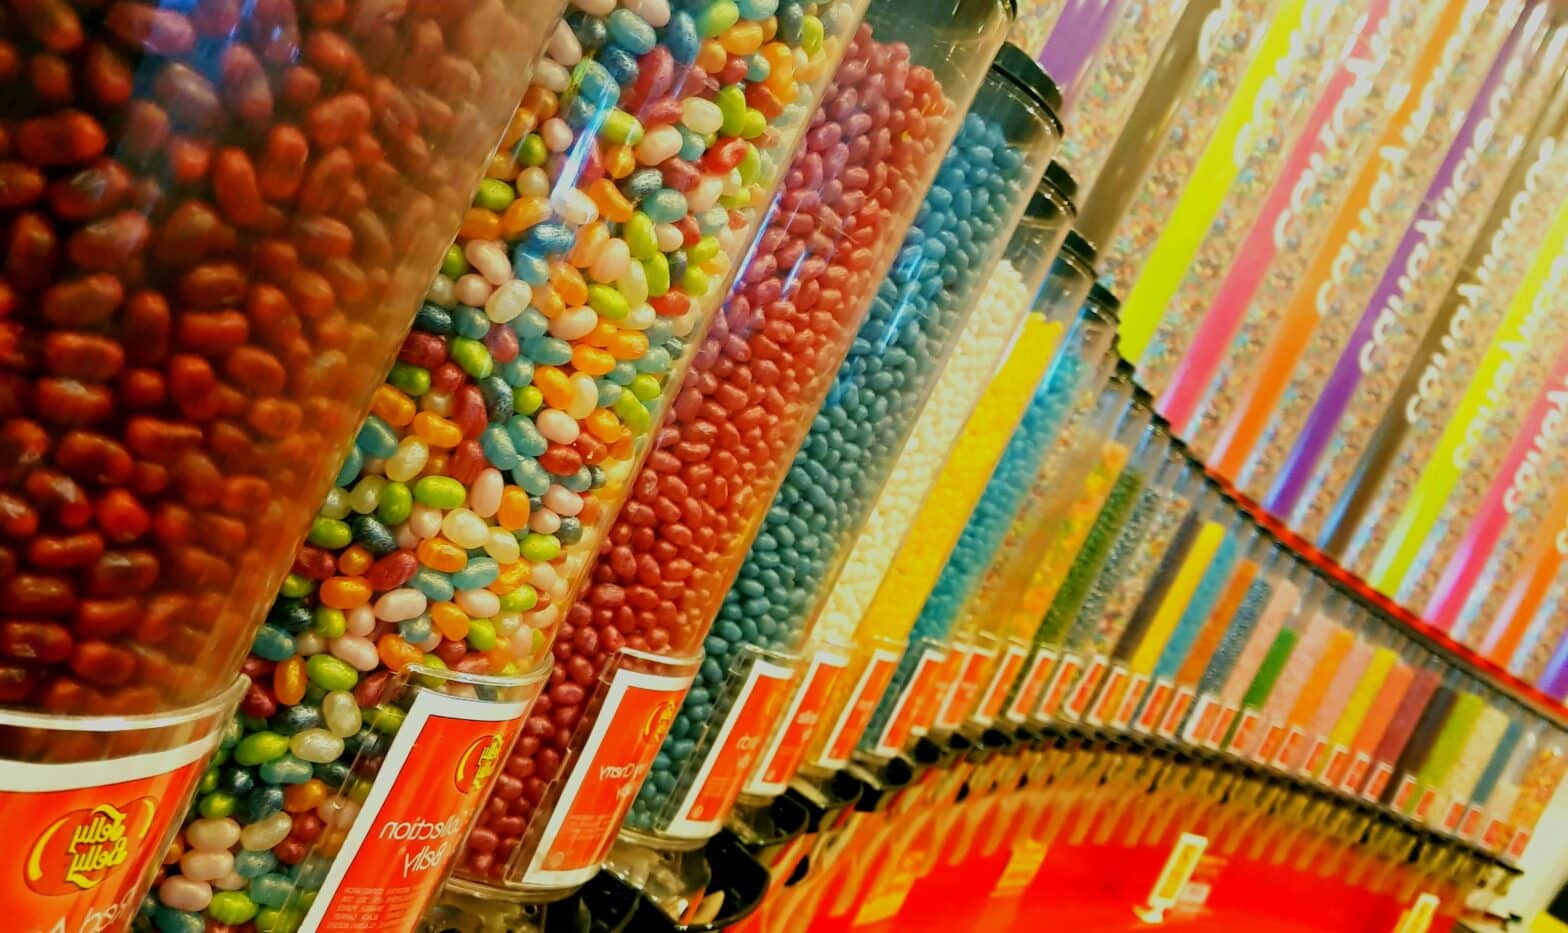 Candy selection representing the variety of choices for martech